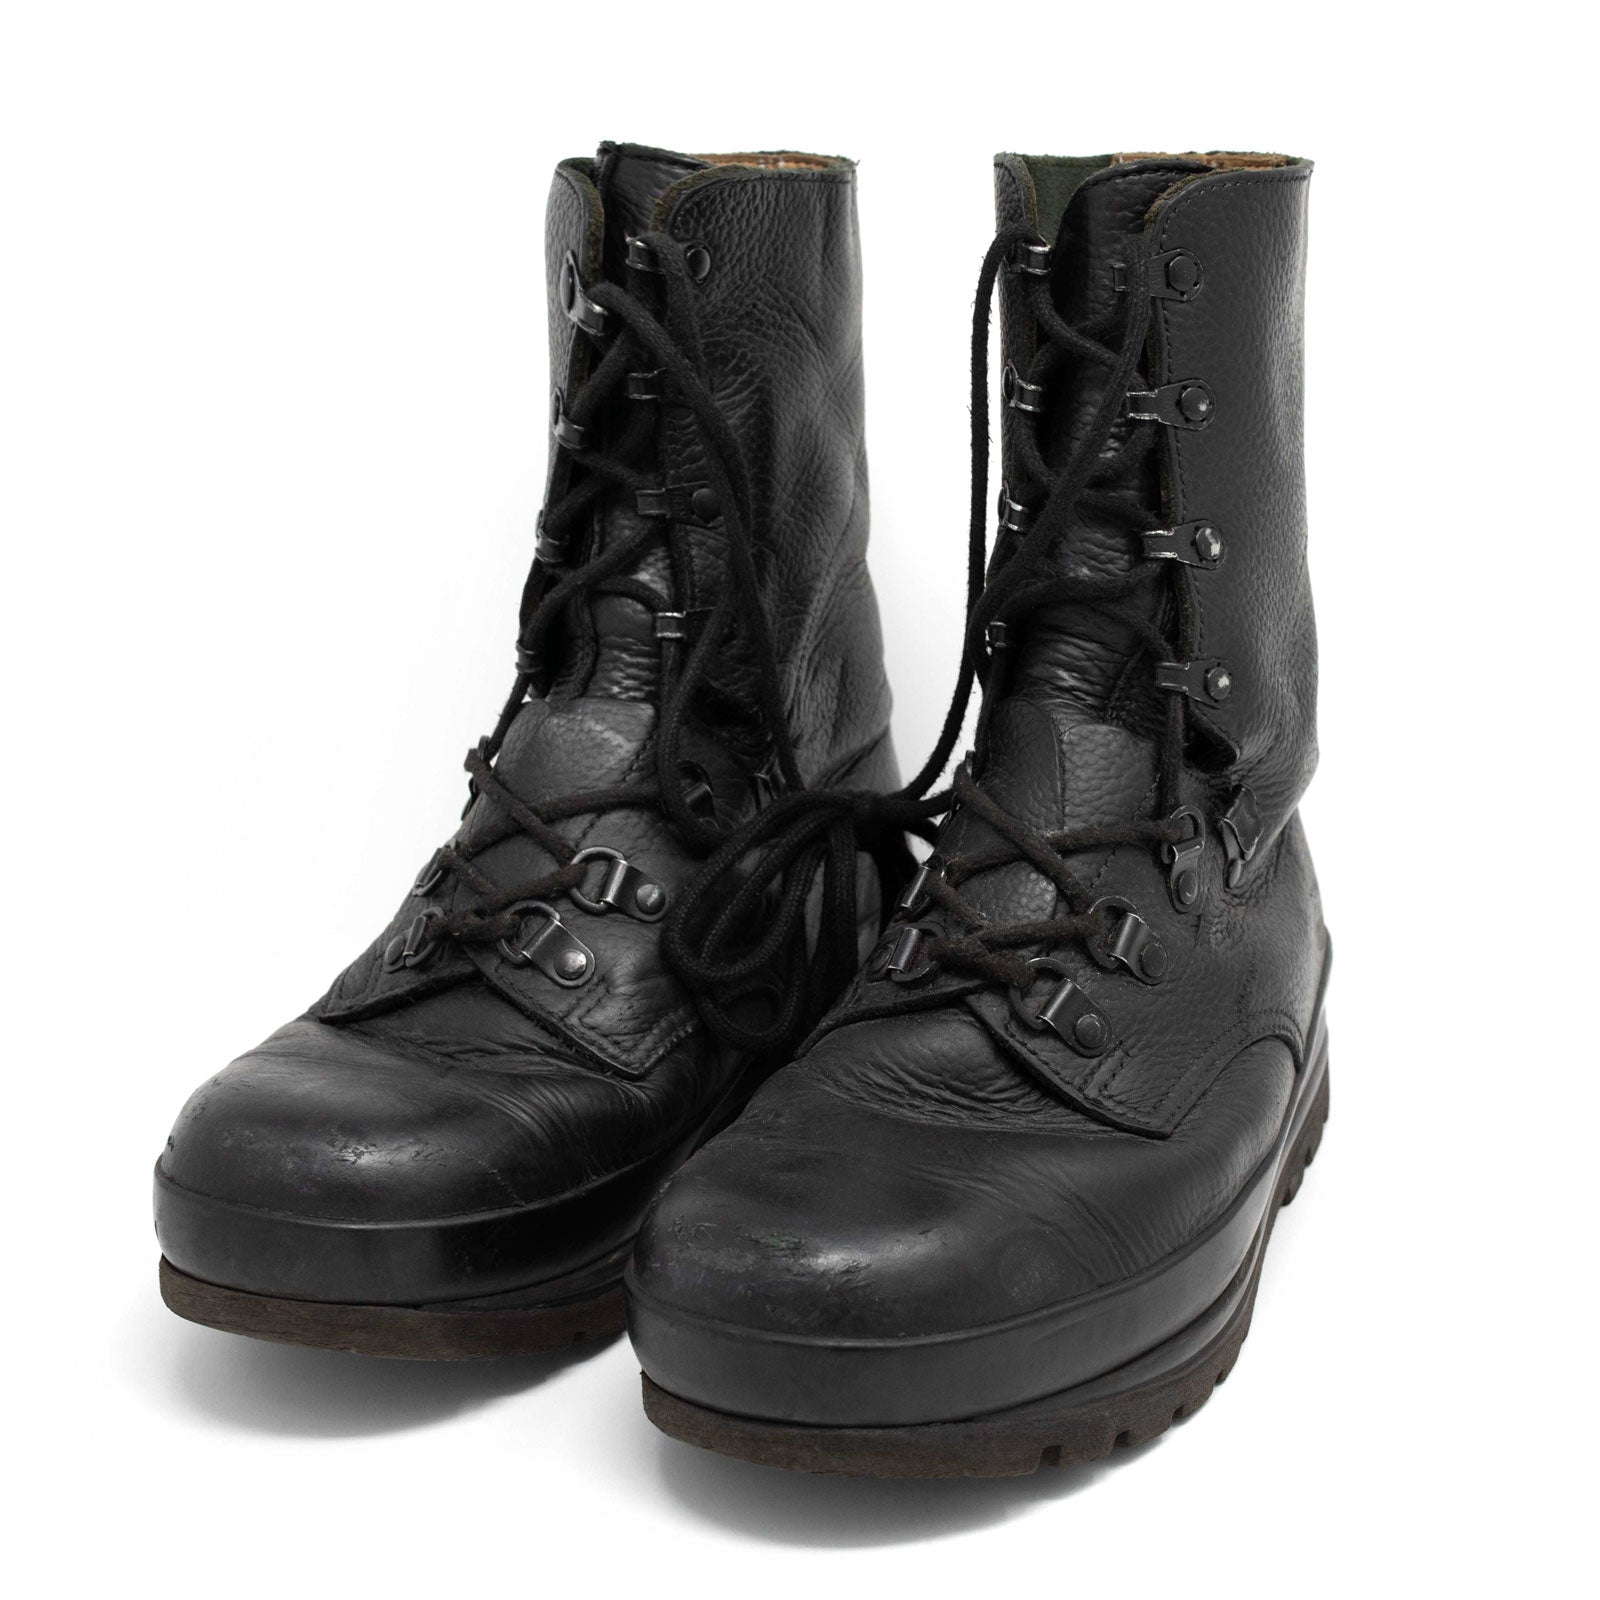 black army boots for sale